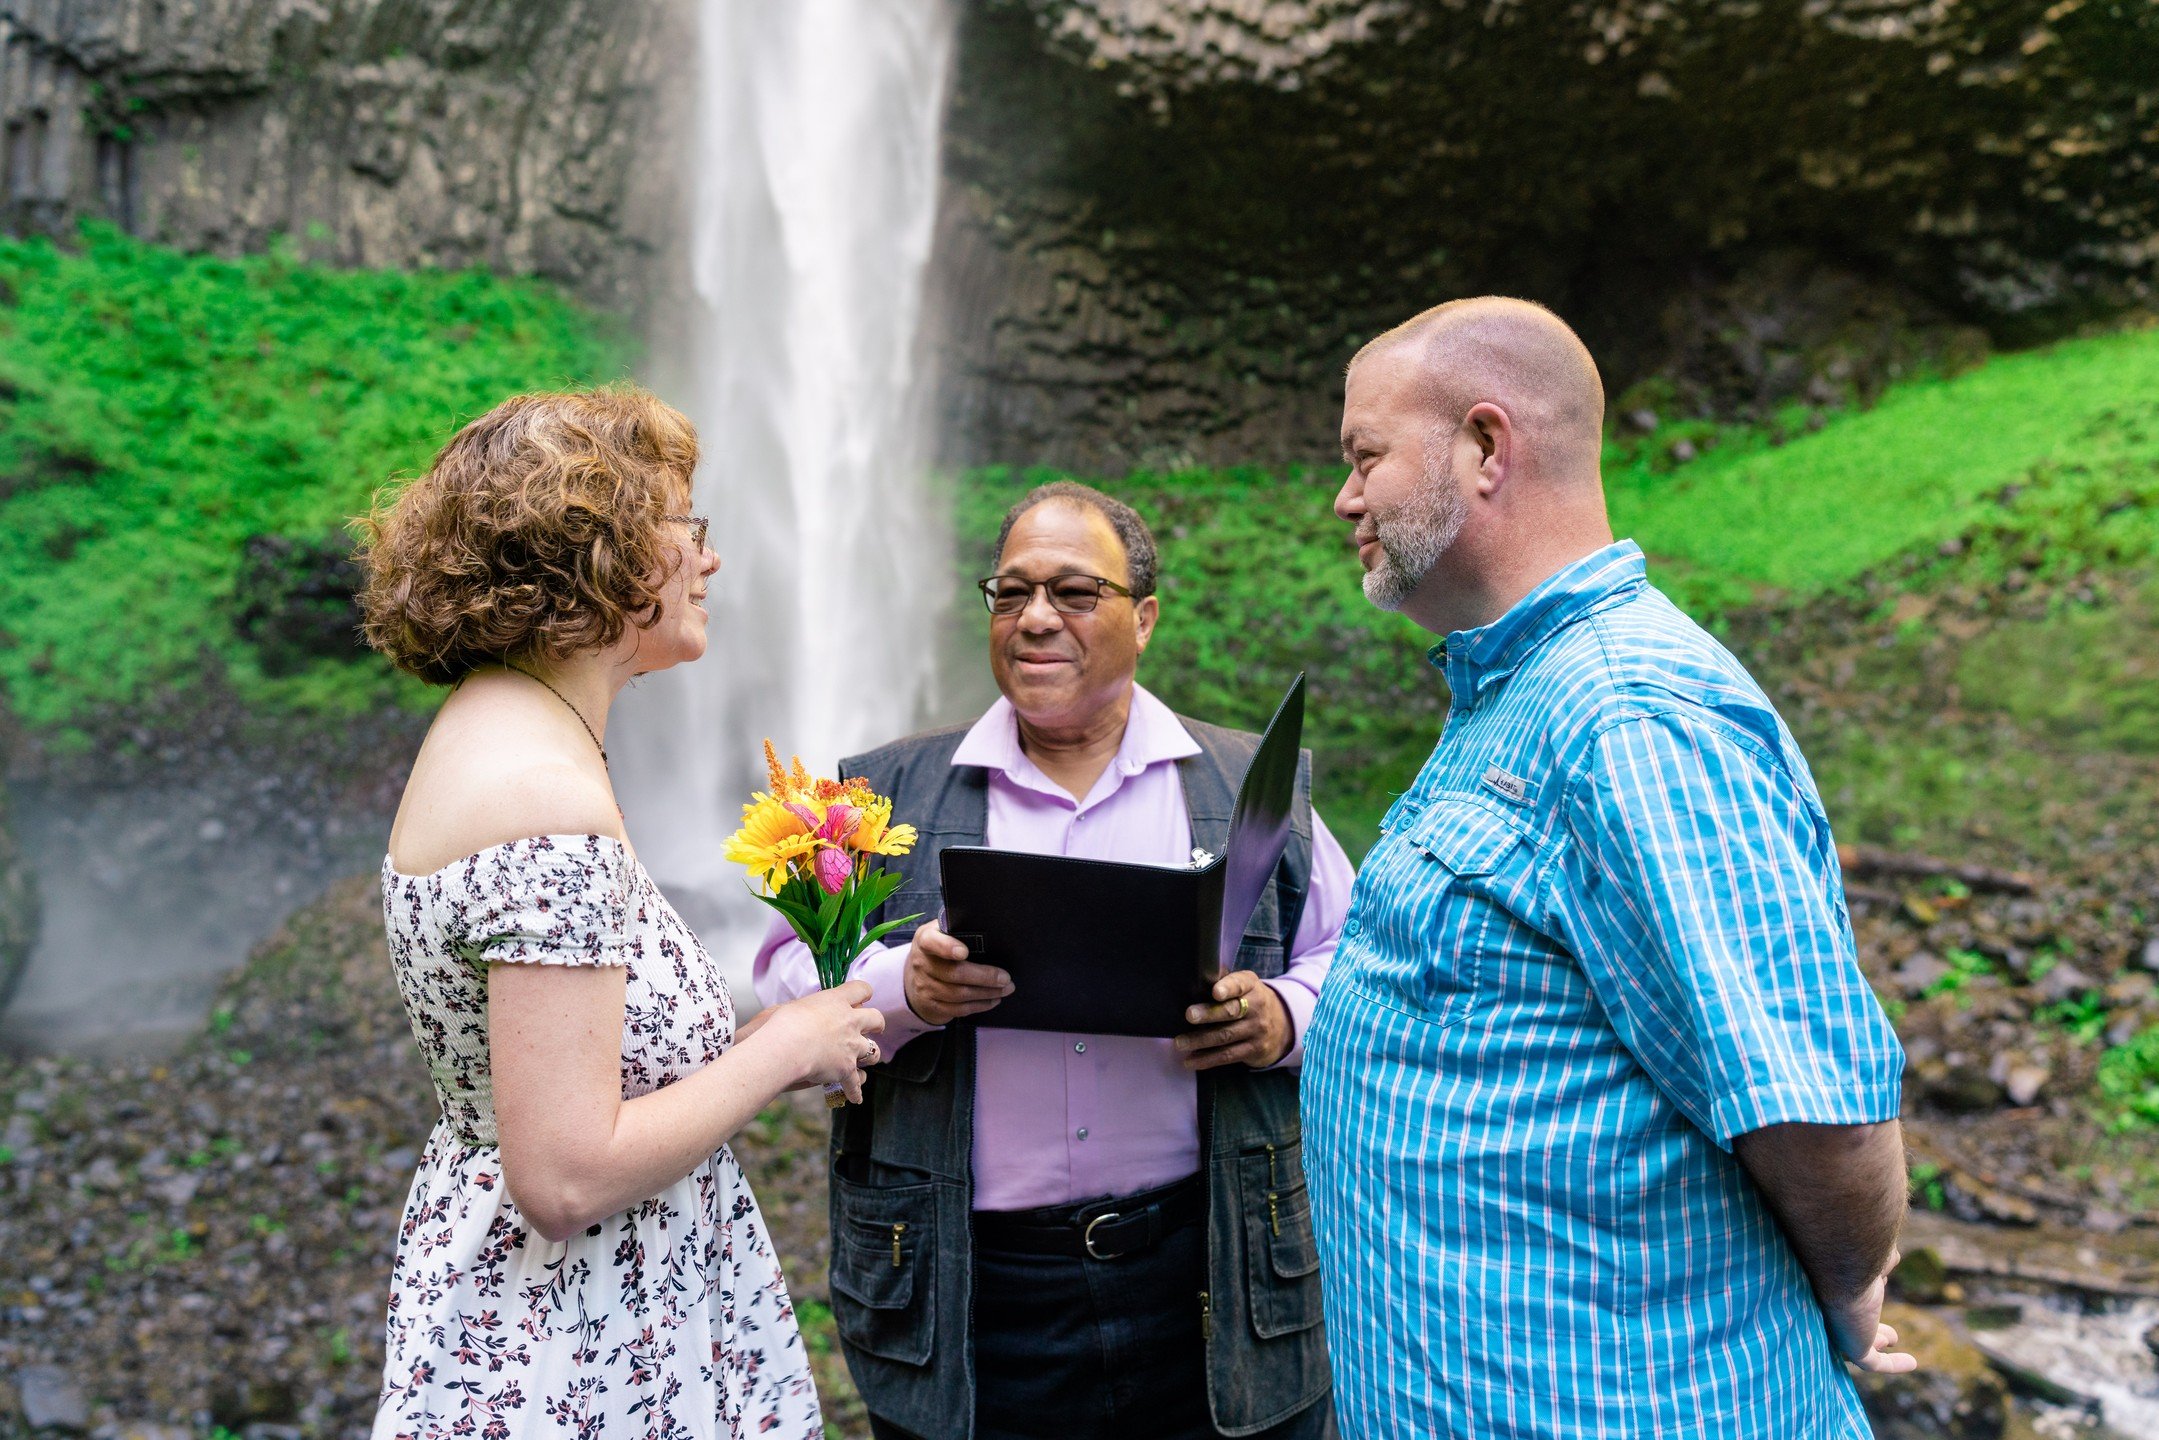 YOU SHOULD Elope in Oregon as it's MAGICAL! Did you know we offer 1hr elopement coverage? This is perfect for people who want the ceremony and some couple photos! For this location we recommend in the morning before the crowds show up and during the 